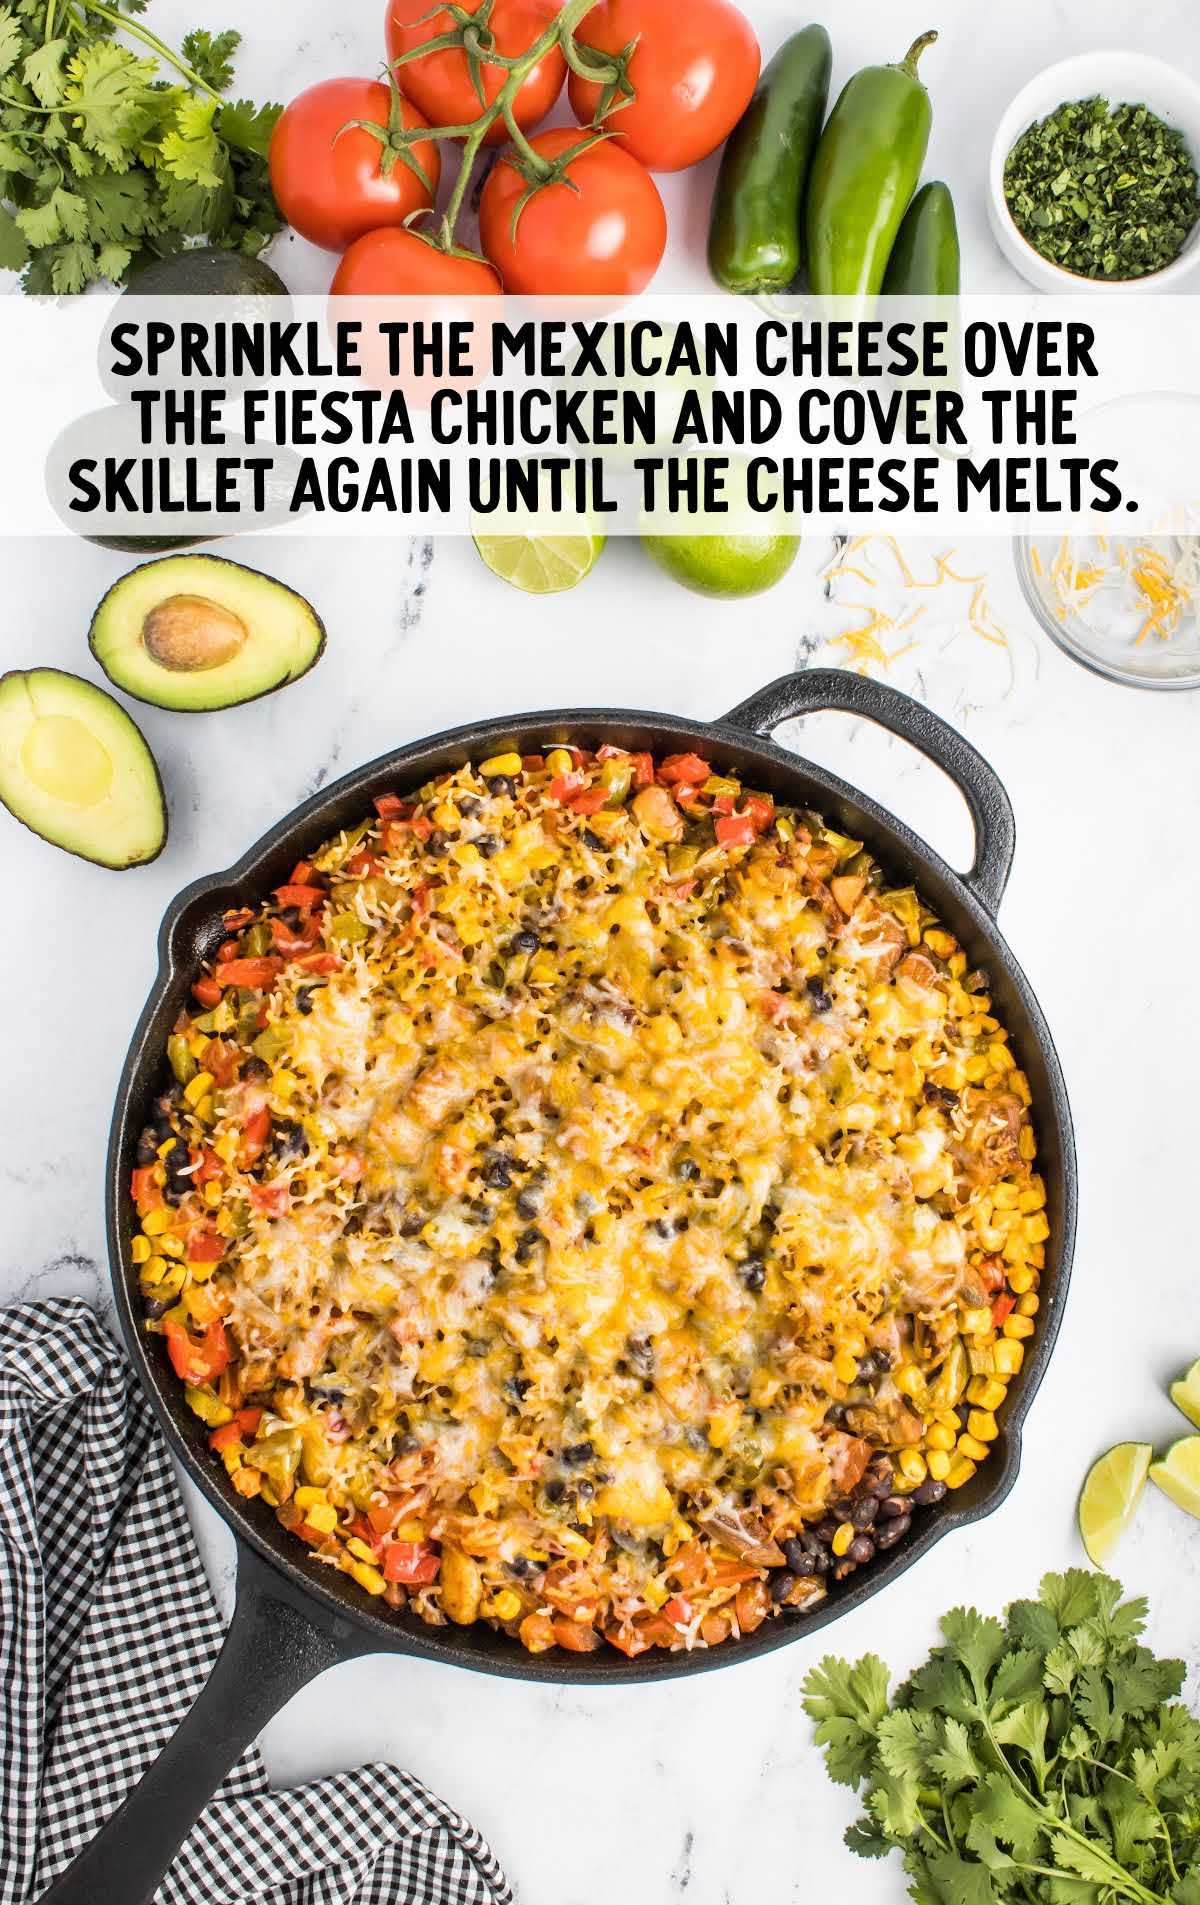 Mexican cheese sprinkled over the fiesta chicken